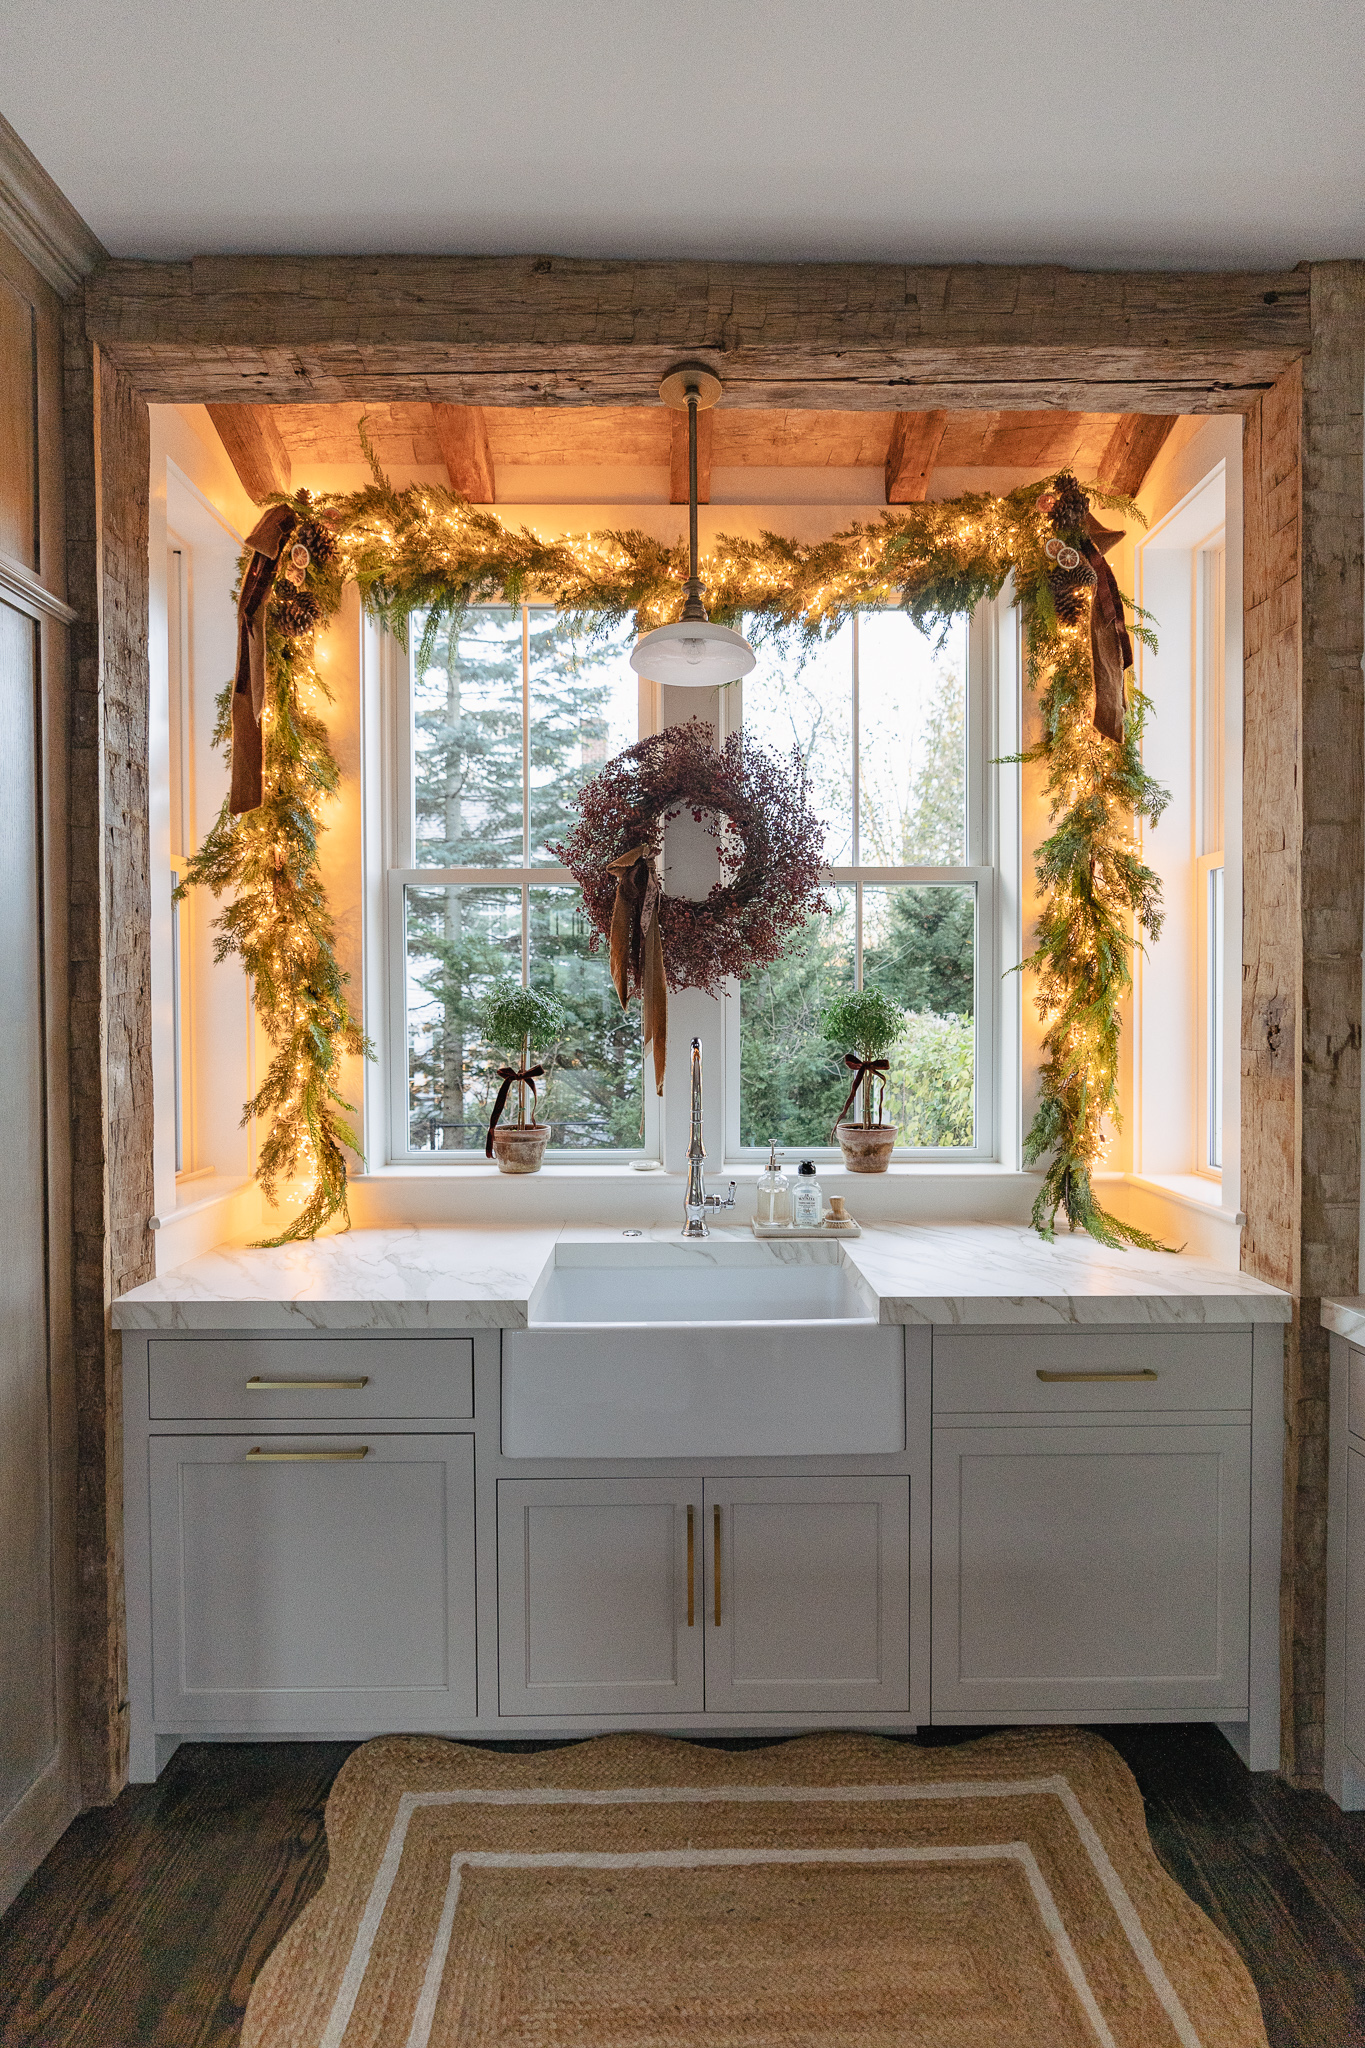 Love this kitchen sink with exposed wood beams and beautiful Christmas garland 